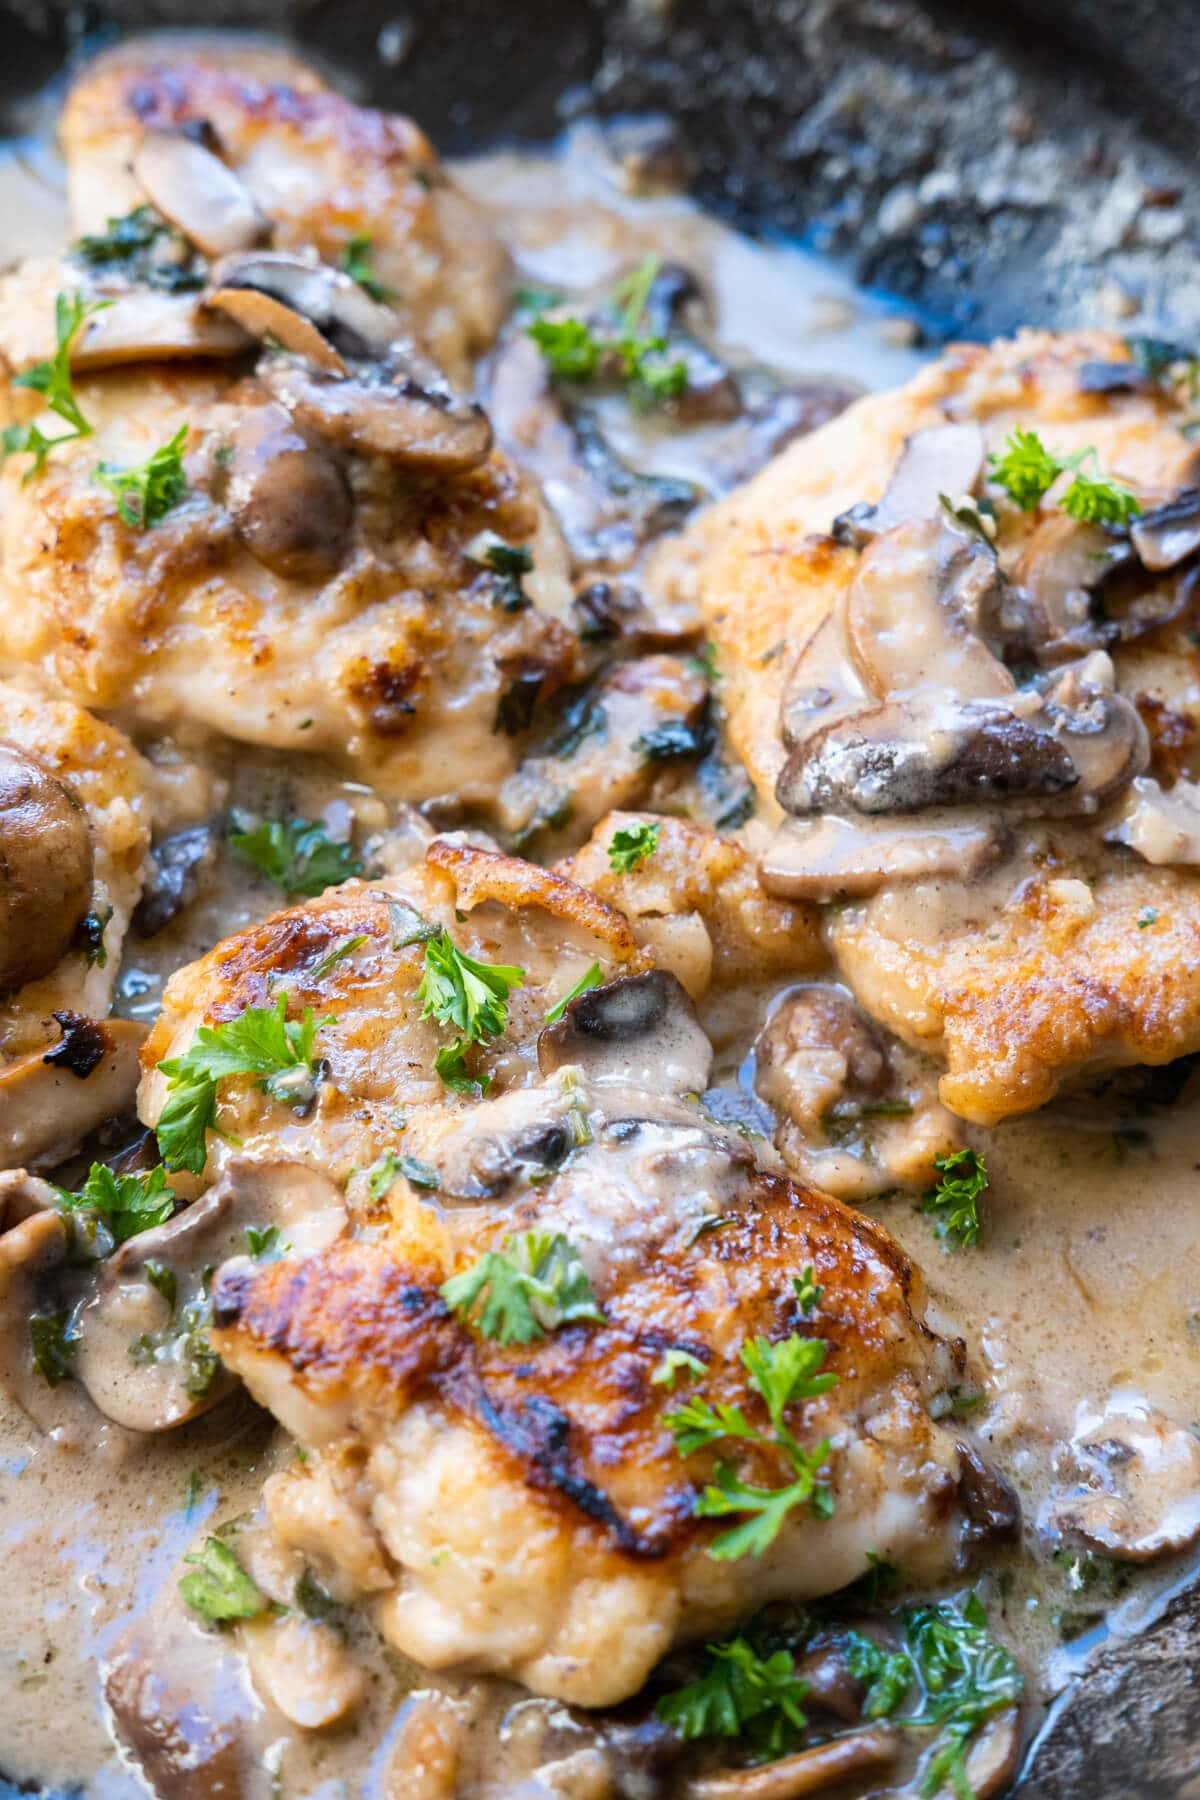 Tender chicken pieces and mushrooms in a savory Marsala wine sauce topped with parsley. 